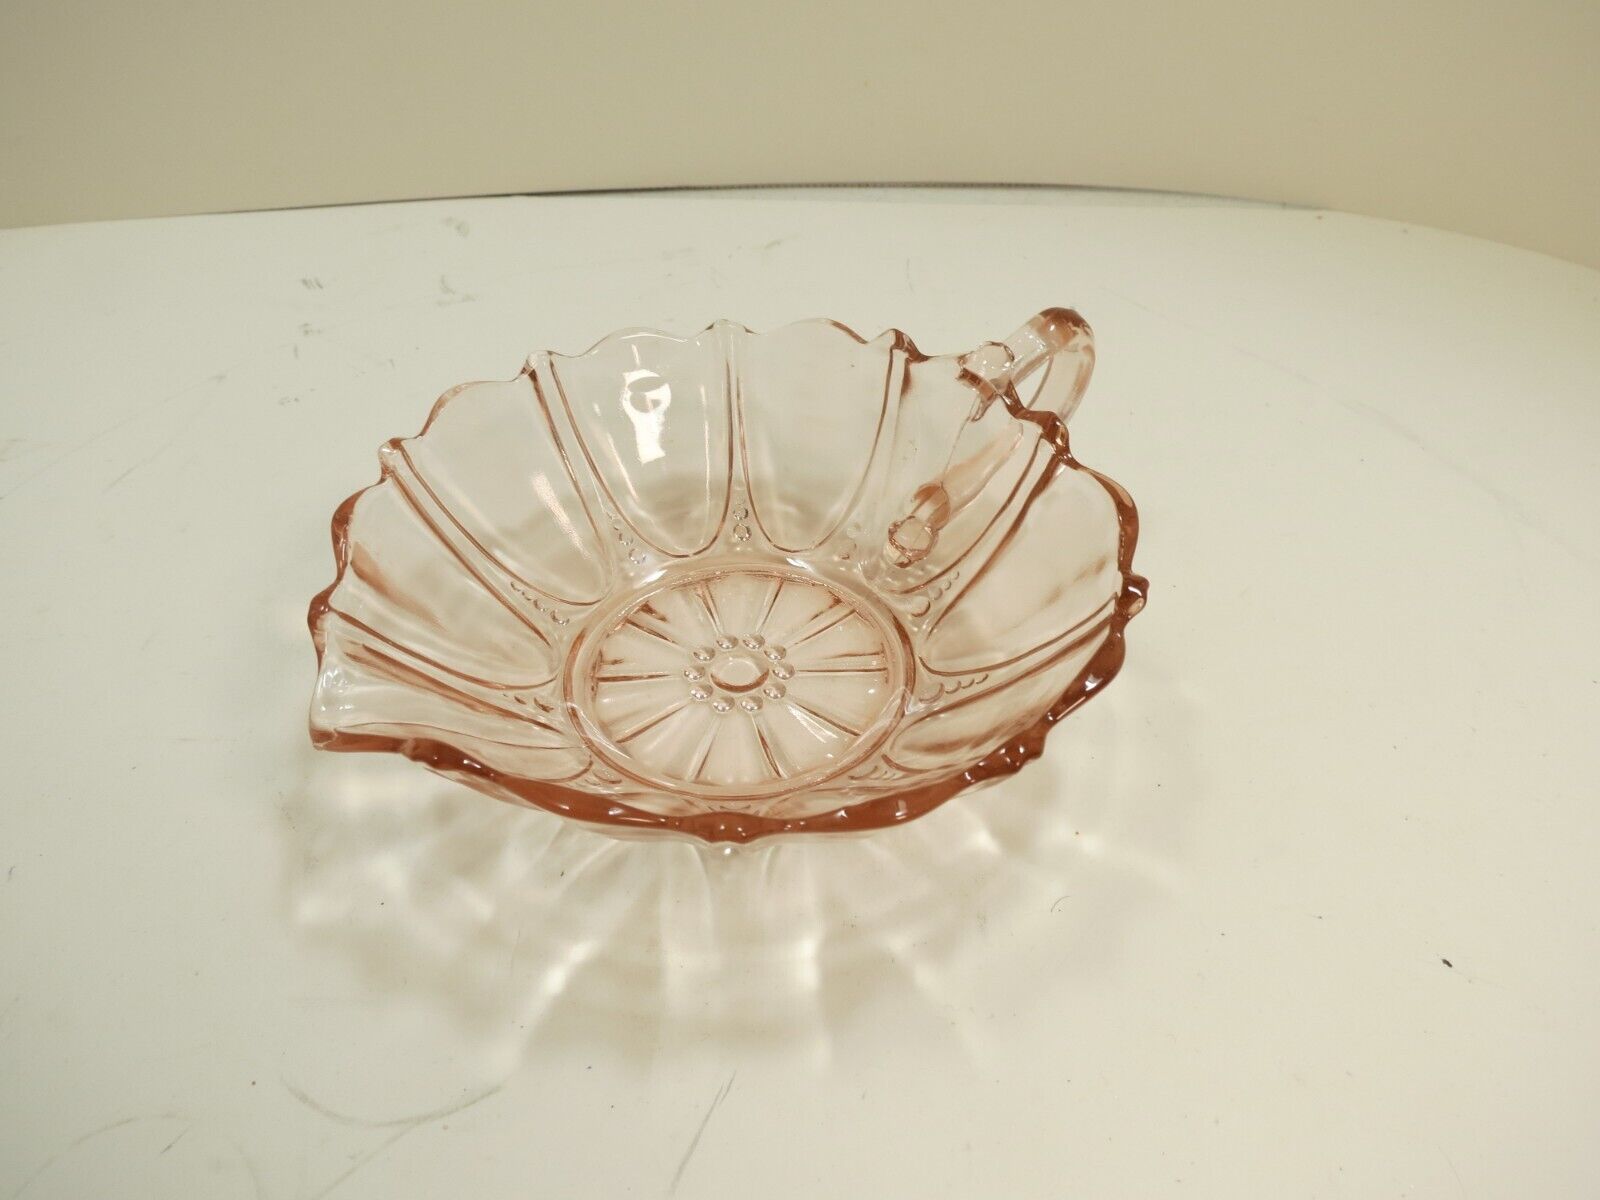 Anchor Hocking Oyster & Pearl Pink Depression Glass Handled Bowl NAPPY STYLE